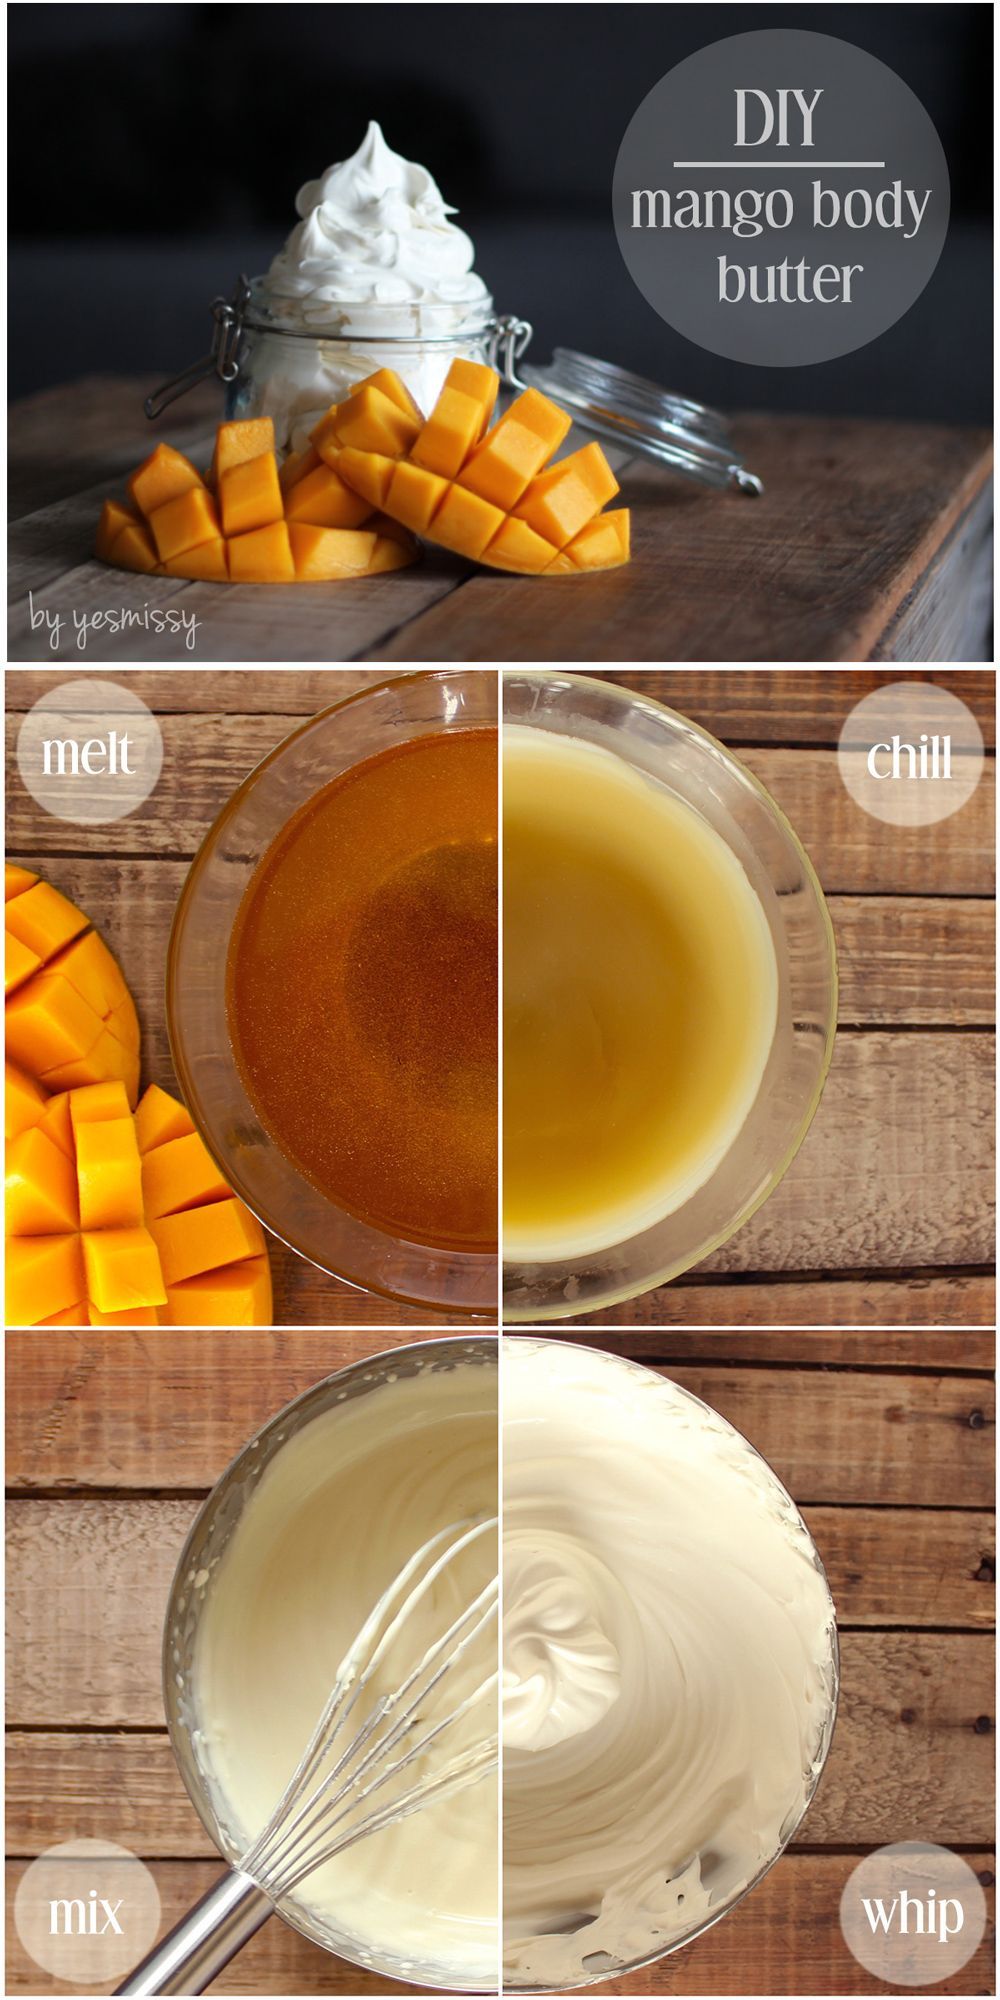 DIY mango body butter recipe – with step by step tutorial